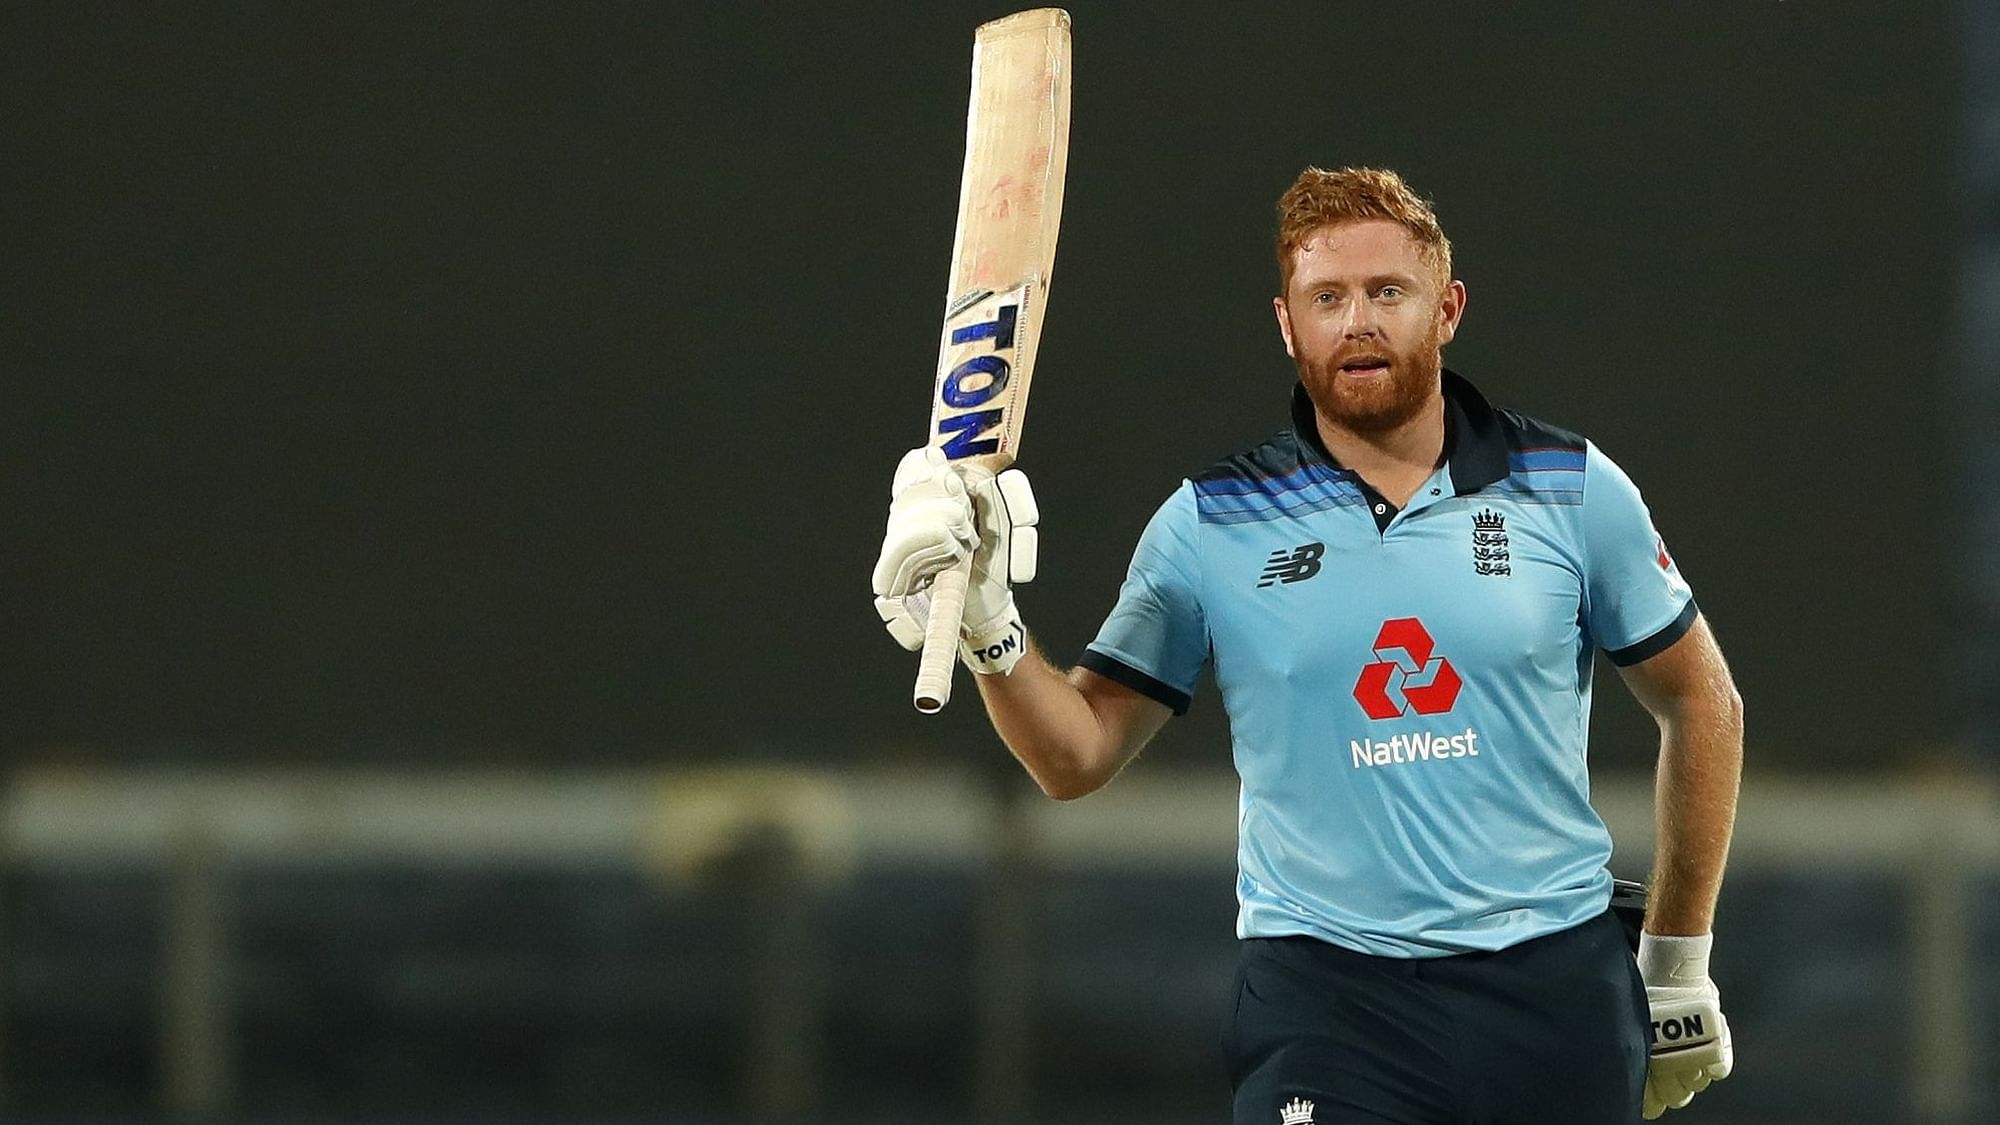 Jonny Bairstow of England celebrates after scoring a hundred during the 2nd One Day International match between India and England held at the Maharashtra Cricket Association Stadium, Pune, India on the 26th March 2021&nbsp;